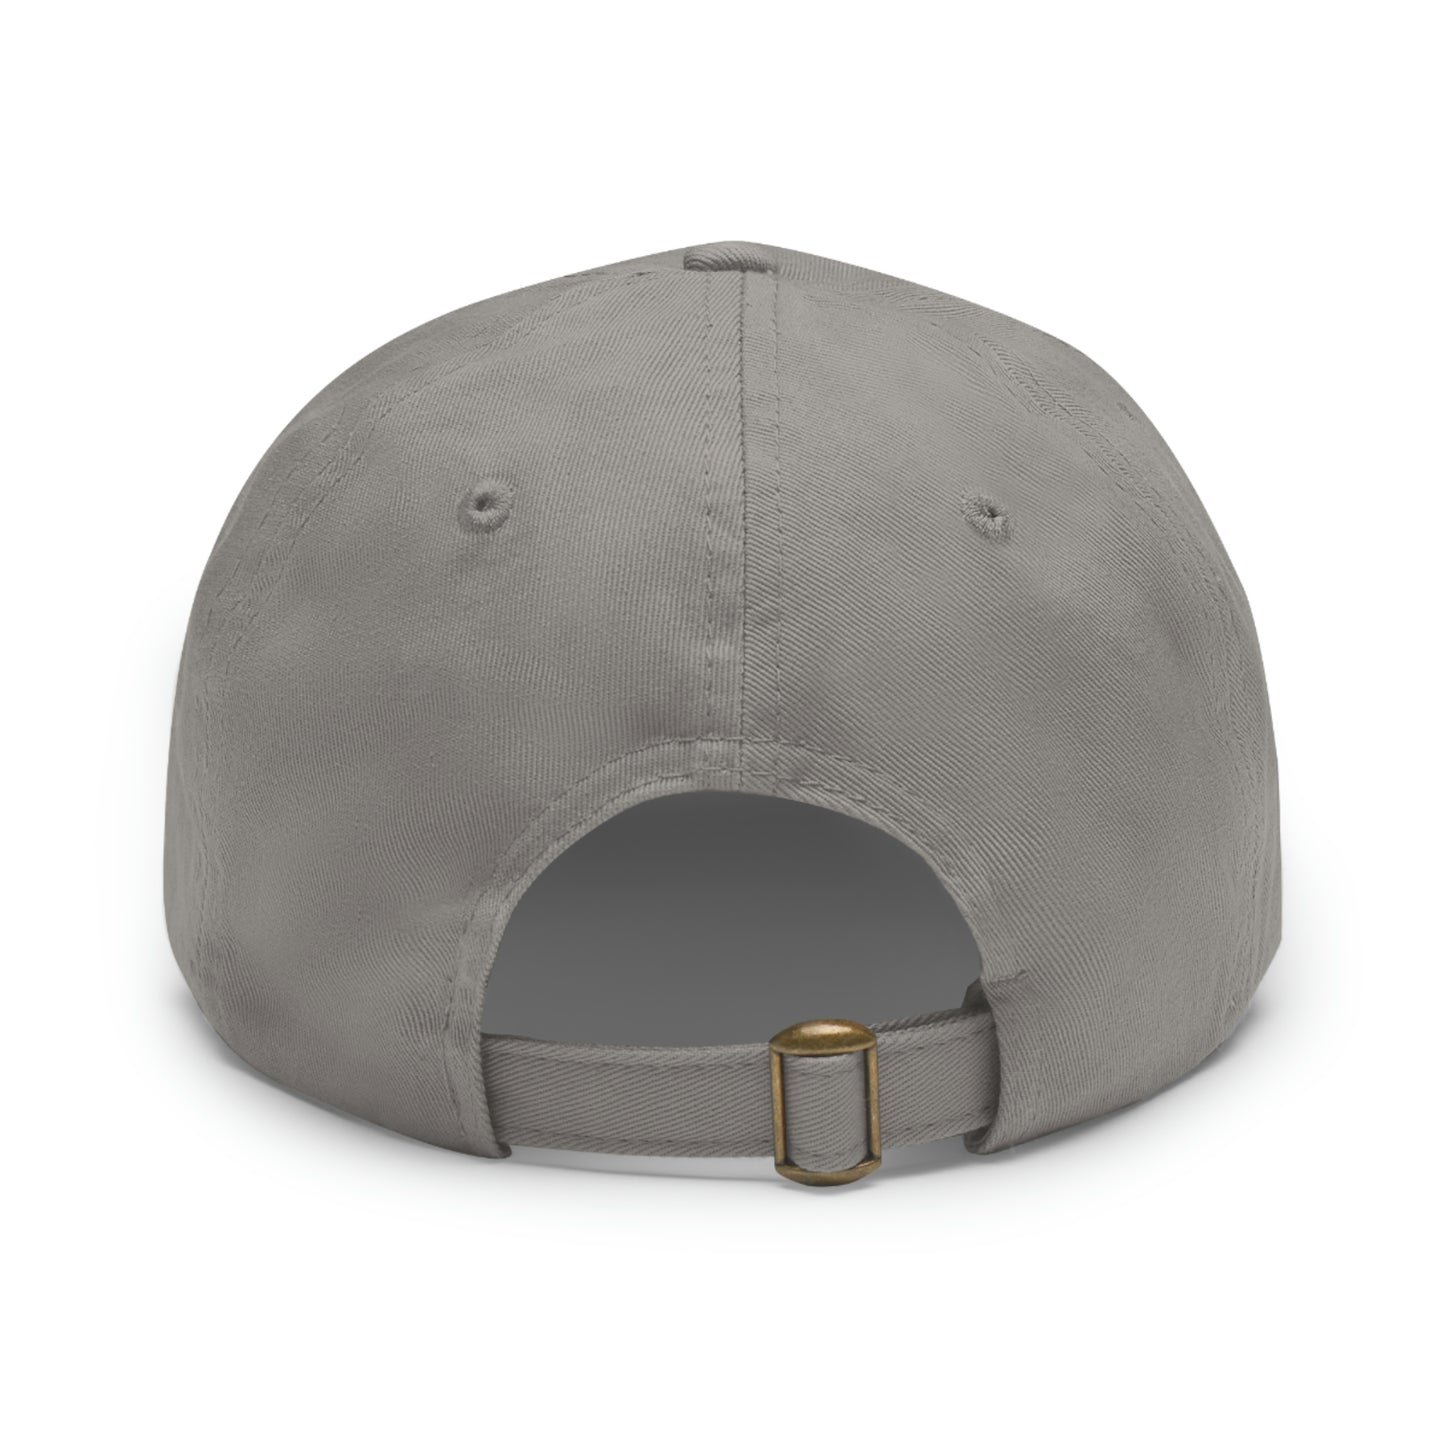 Yosemite Dad Hat with Leather Patch